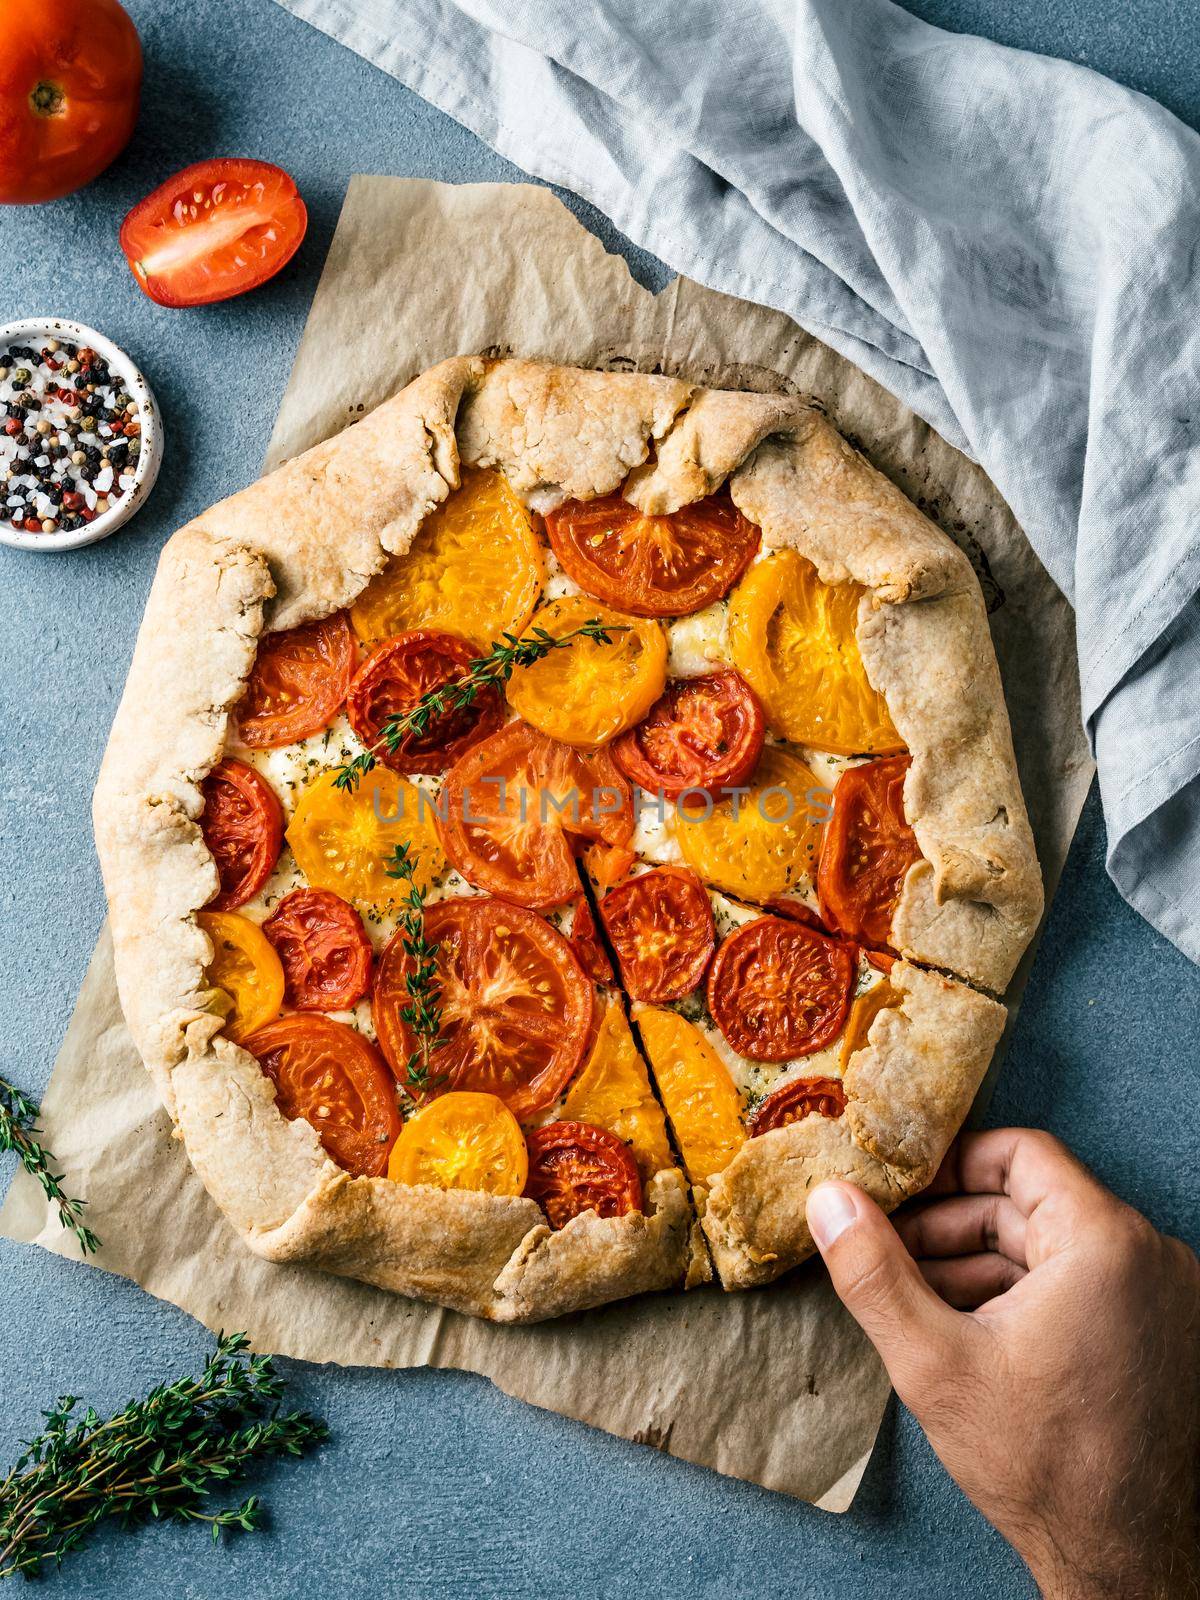 Savory fresh homemade tomato tart or galette.Hand takes piece of pie.Ideas and recipes healthy lunch,appetiezer-whole wheat or rye-wheat pie with tomatoes and cheese.Harvest tomatoes.Top view.Vertical